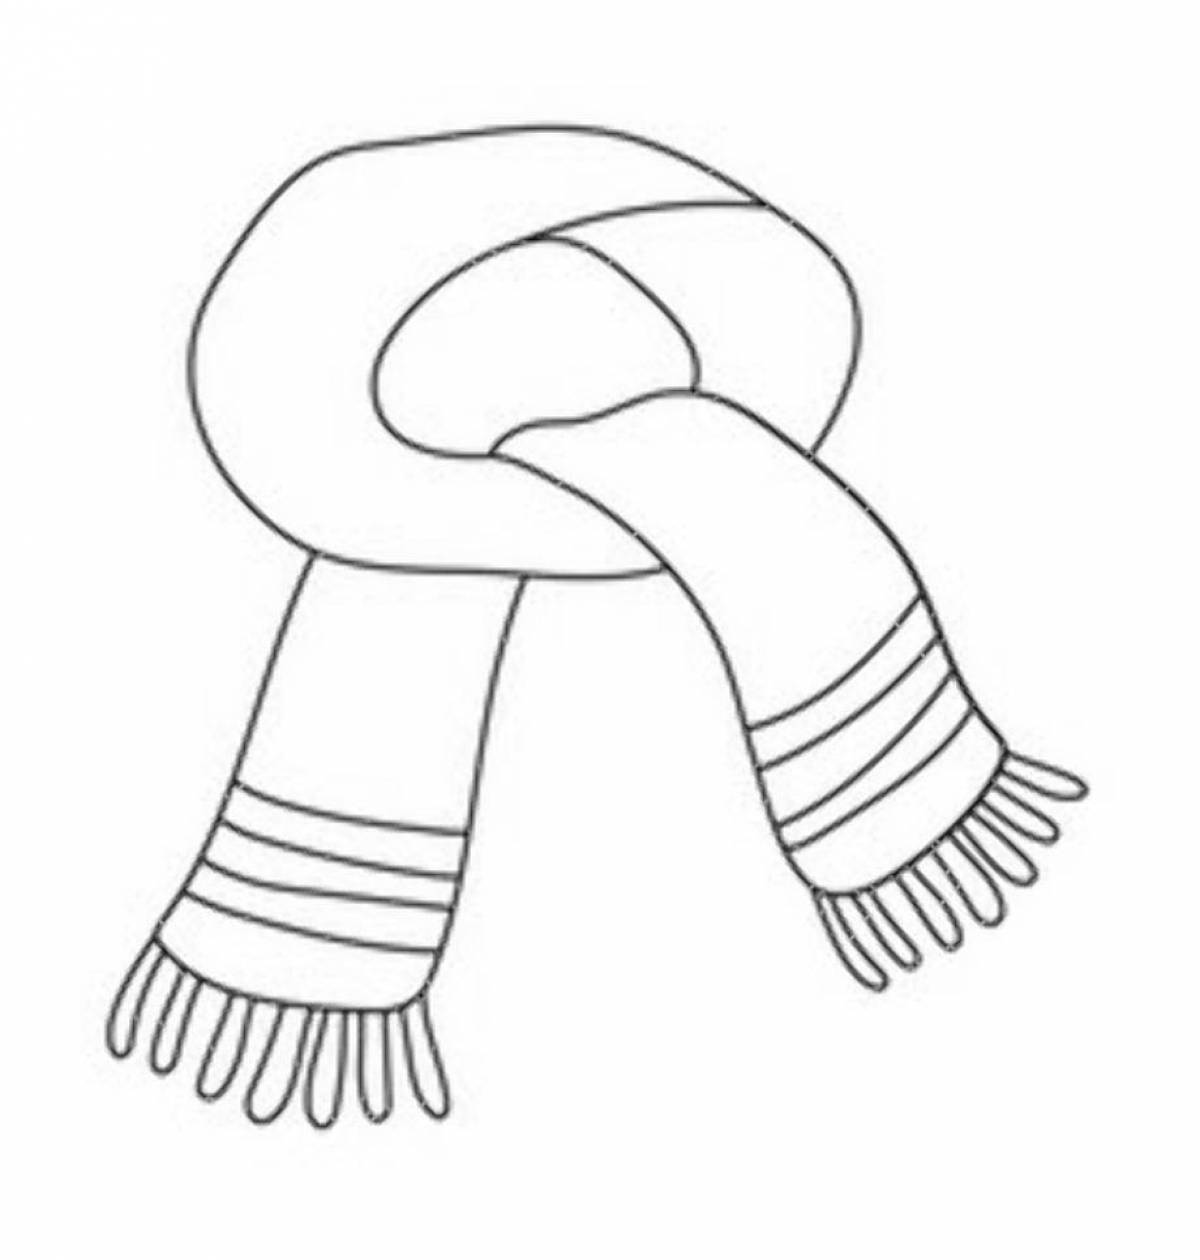 Fun coloring scarf for children 3-4 years old